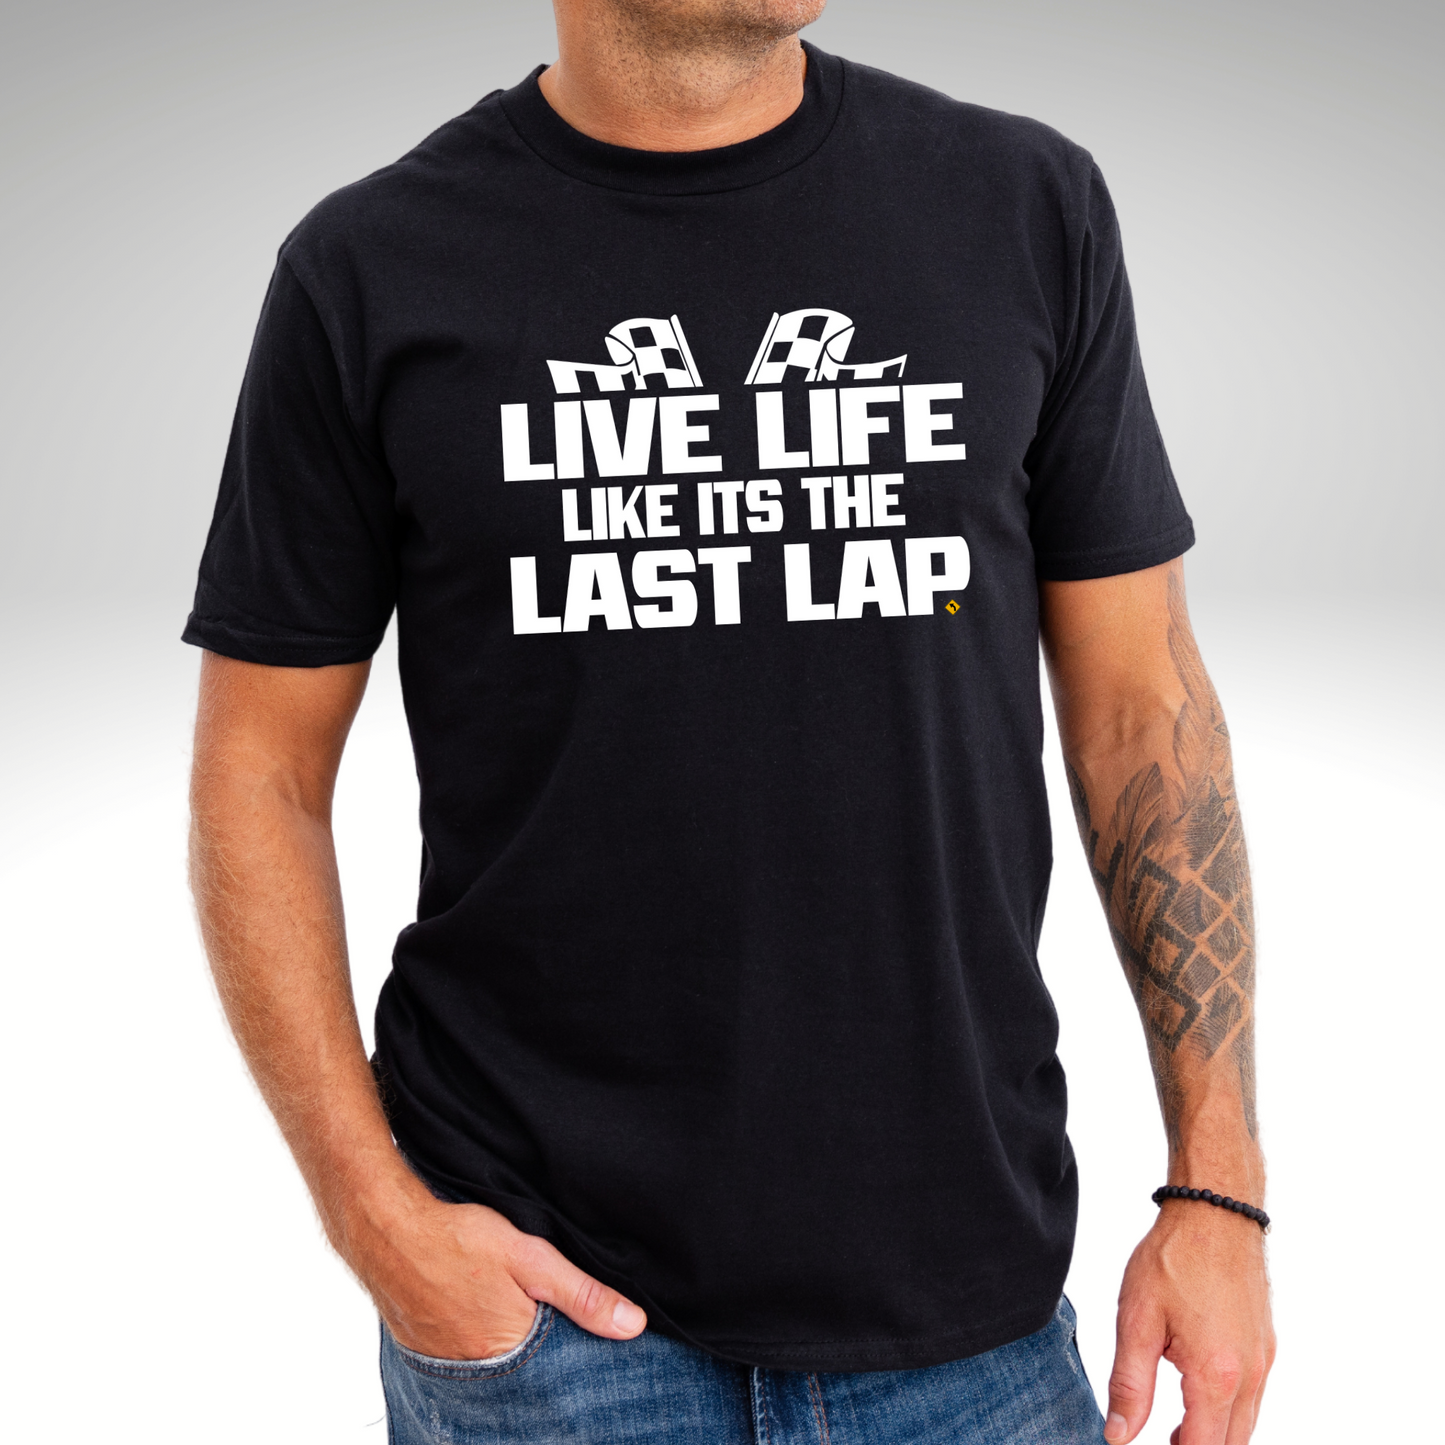 Men's Dirt Track Racing Quote T-Shirts. Dirt car racing shirts for men. Live Life Like It's The Last Lap T-Shirts. Men racing gifts 